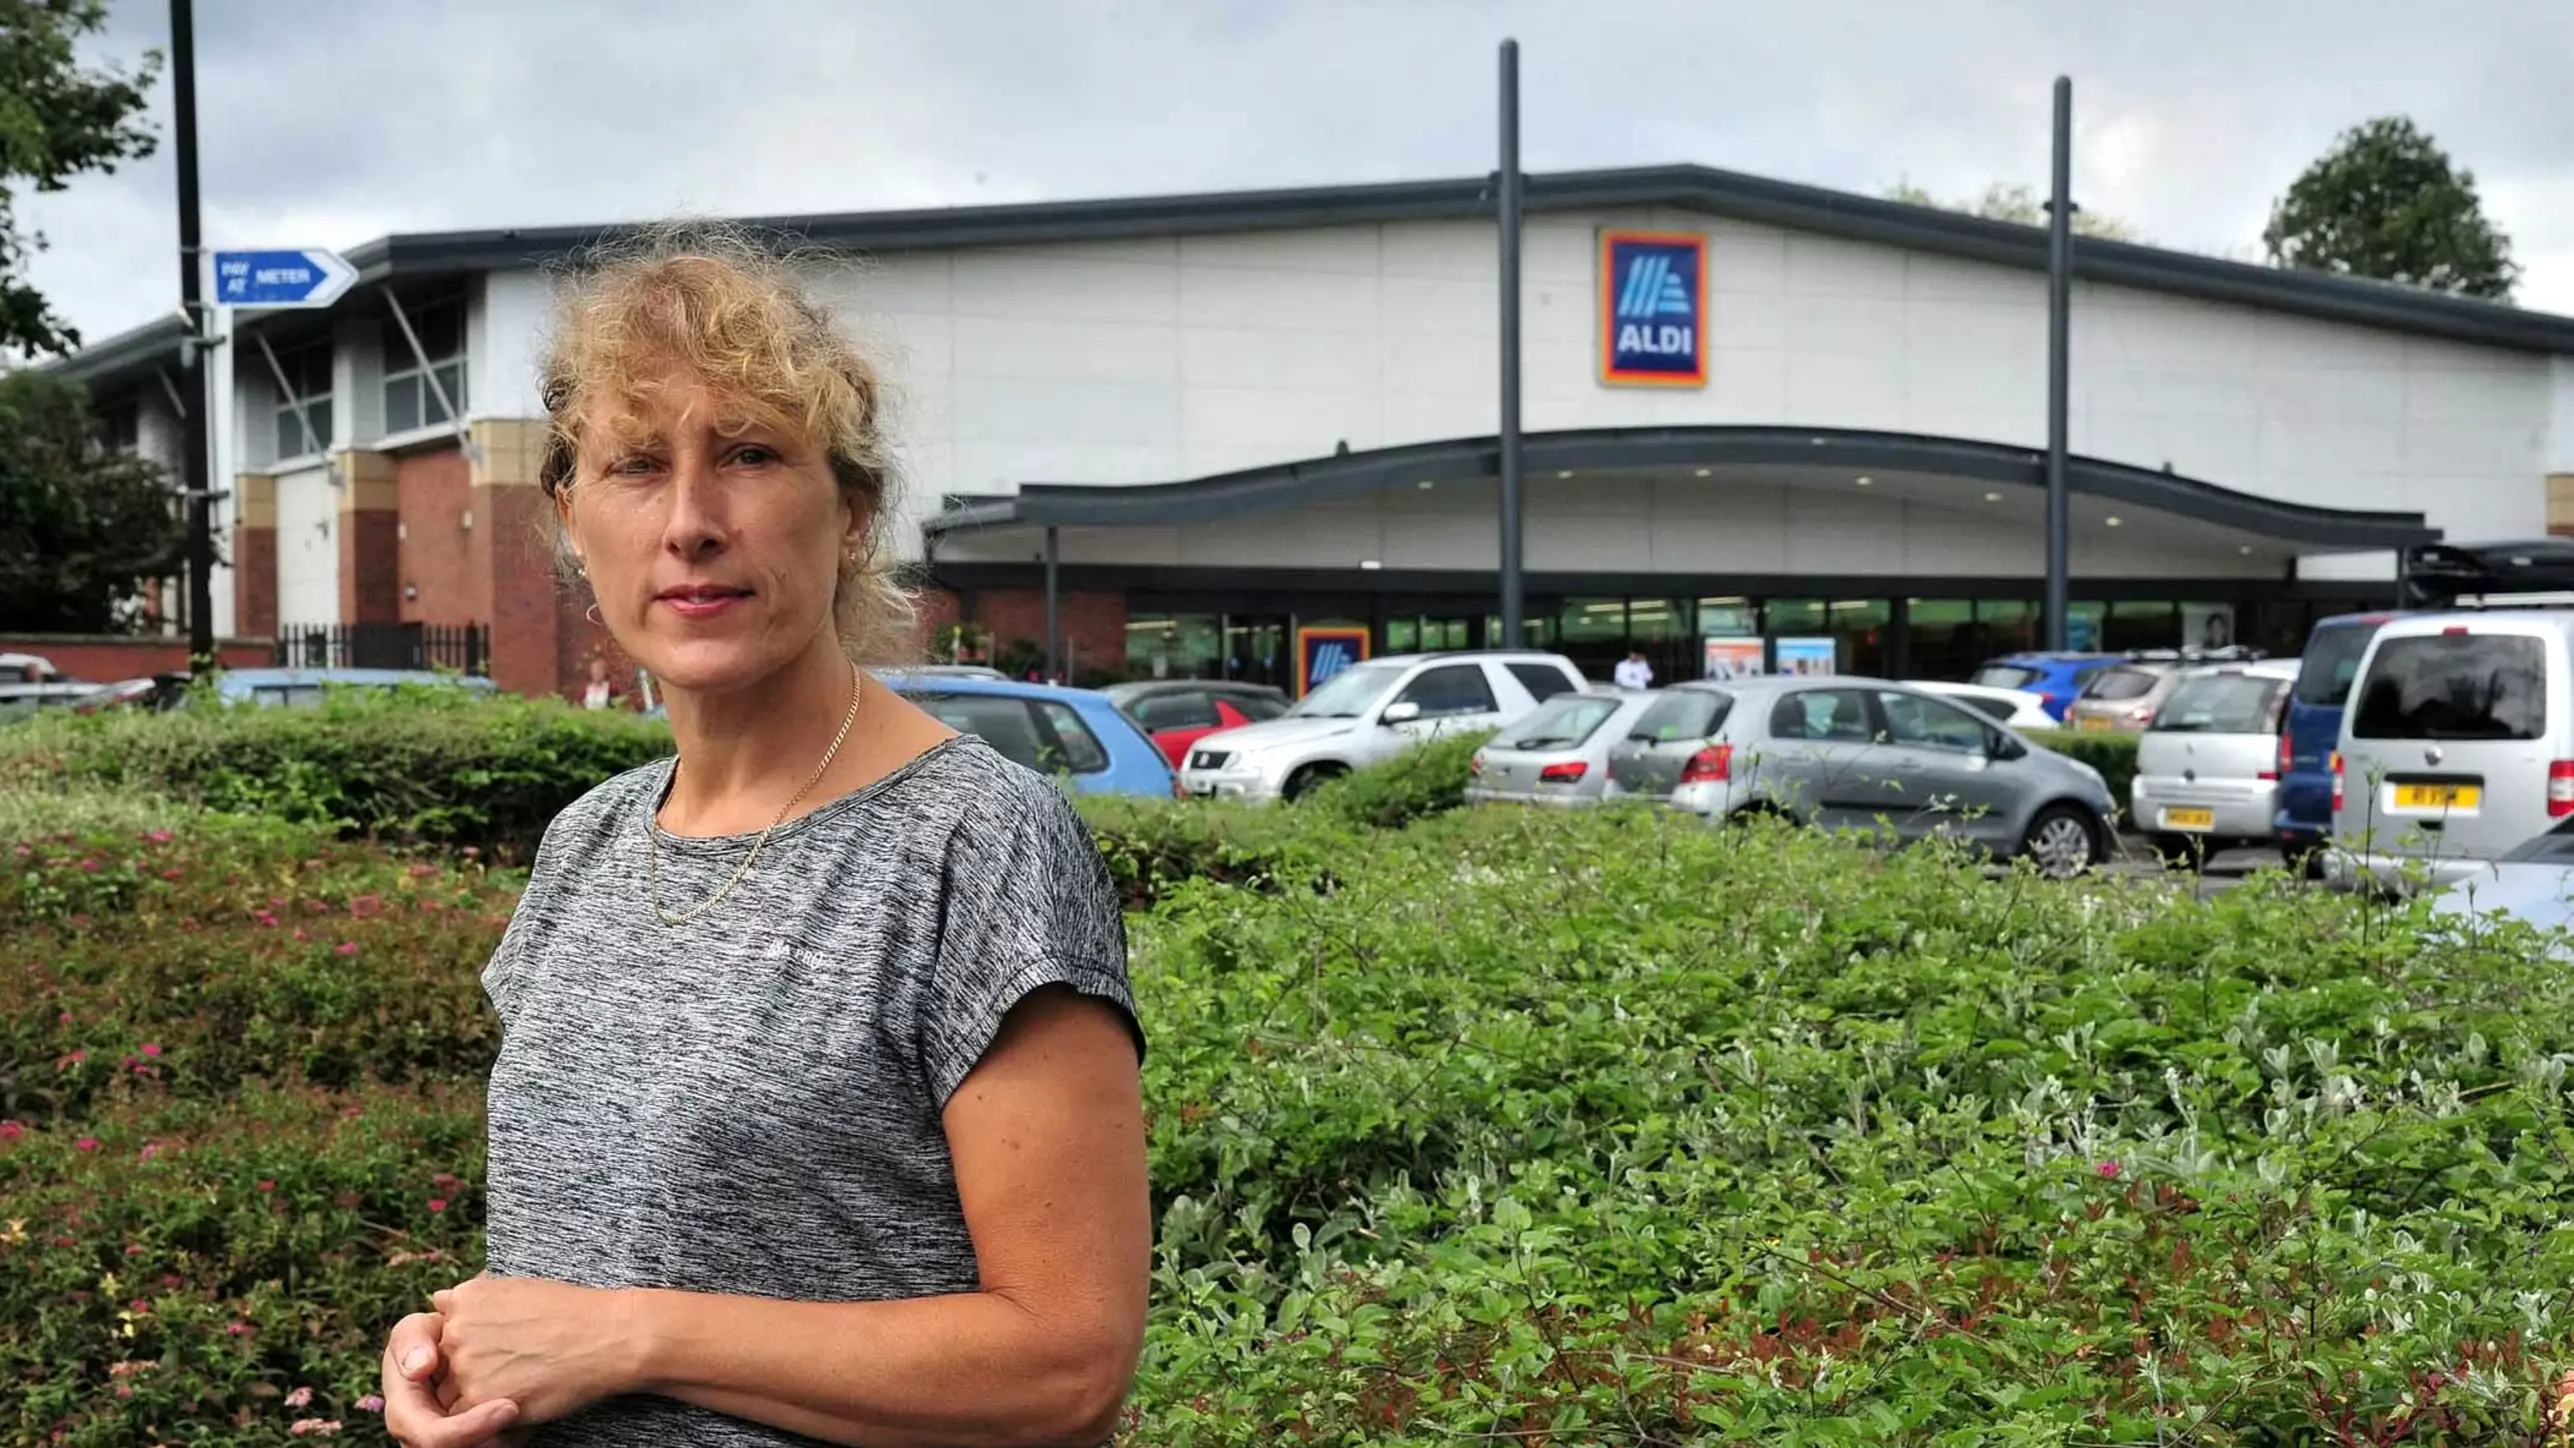 Mum Says Aldi Refused To Sell Her Gin Ice Pops Because She Was With Daughter, 15